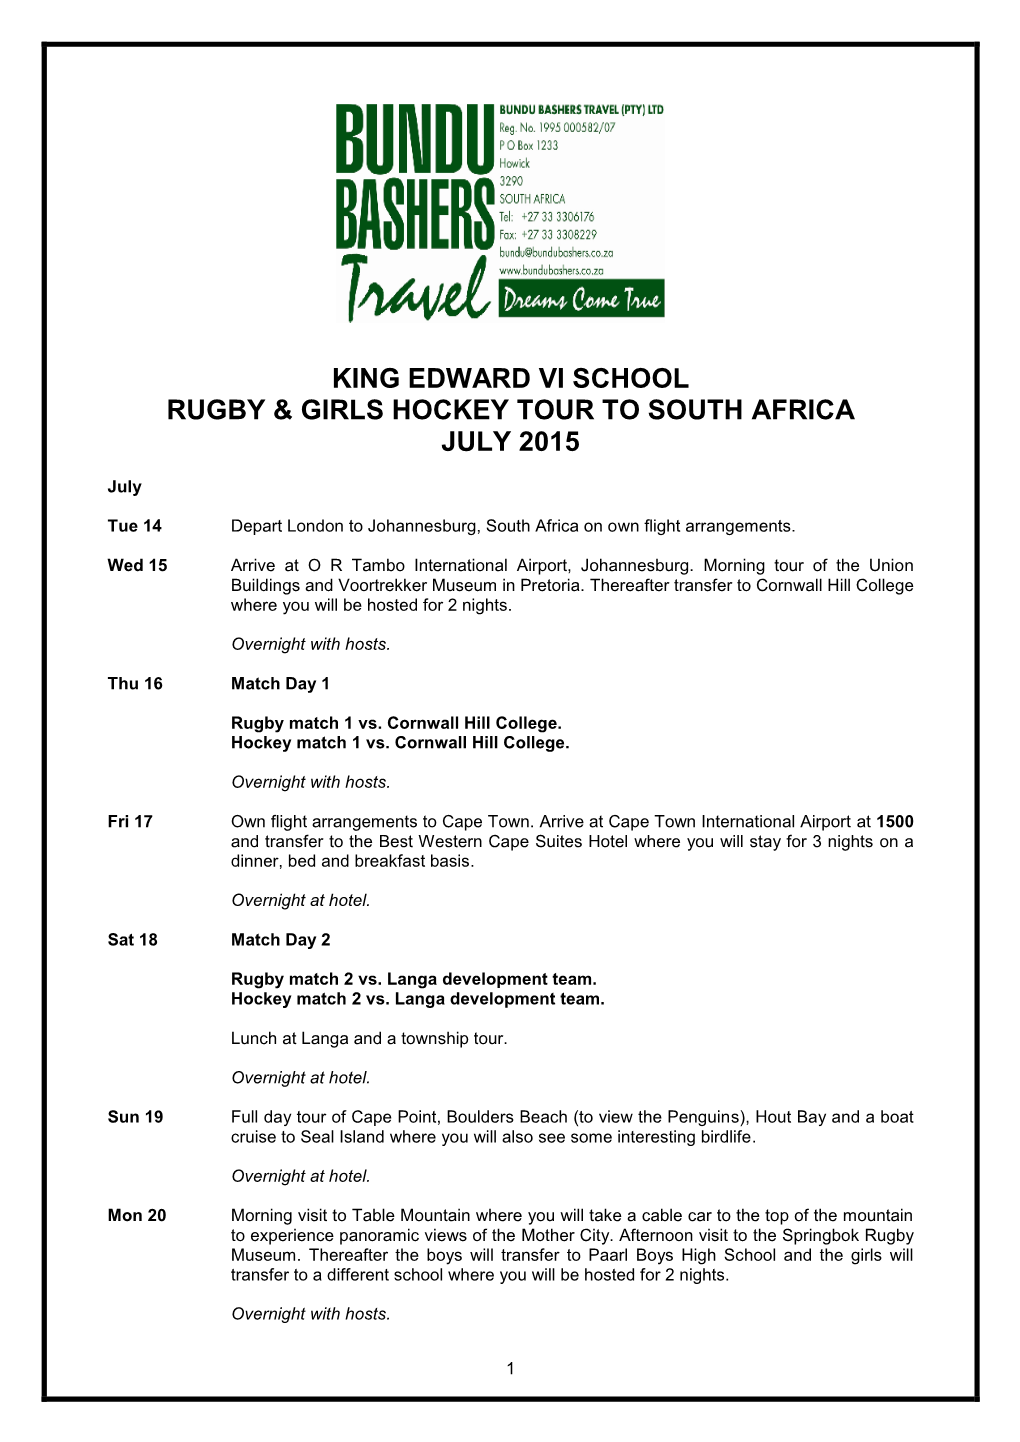 King Edward Vi School Rugby & Girls Hockey Tour to South Africa July 2015